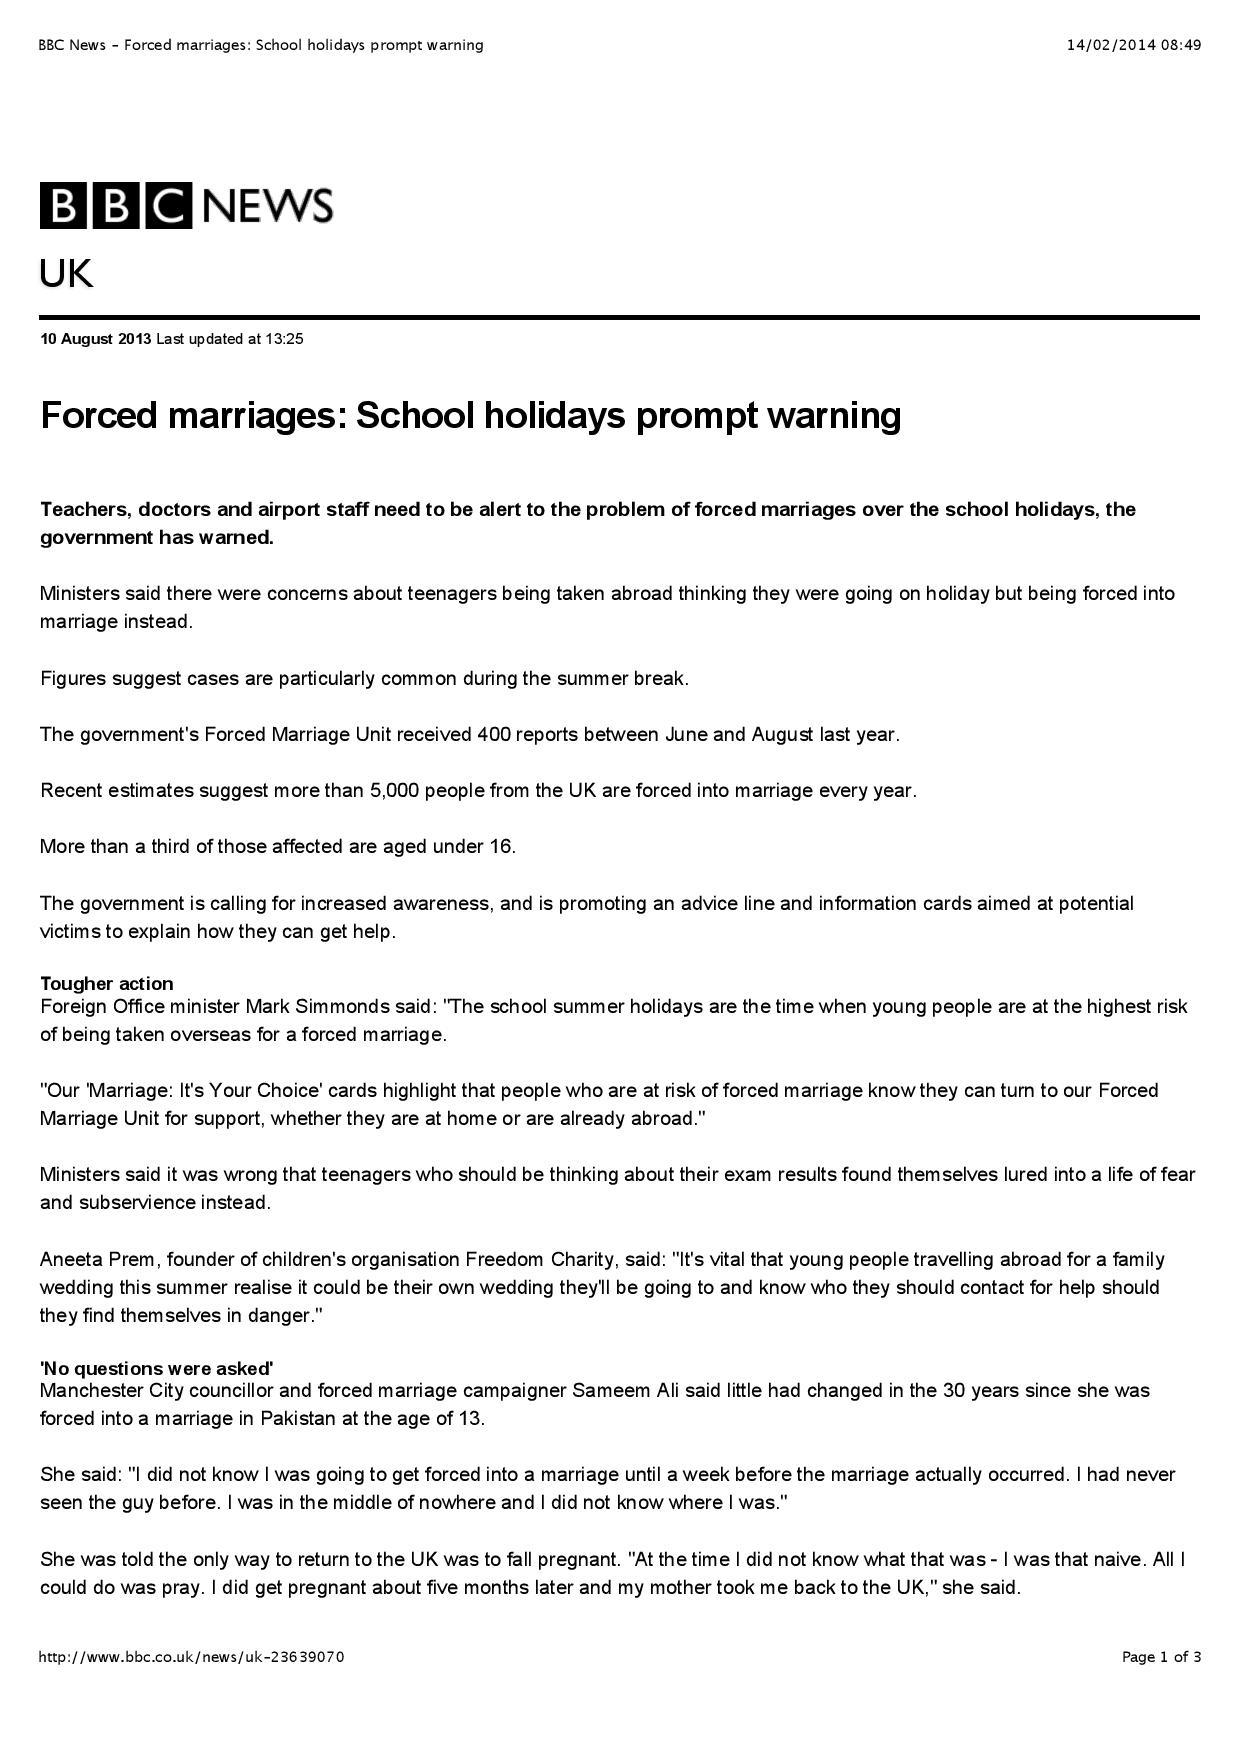 done-bbc-news-forced-marriages-school-holidays-prompt-warning-page-001